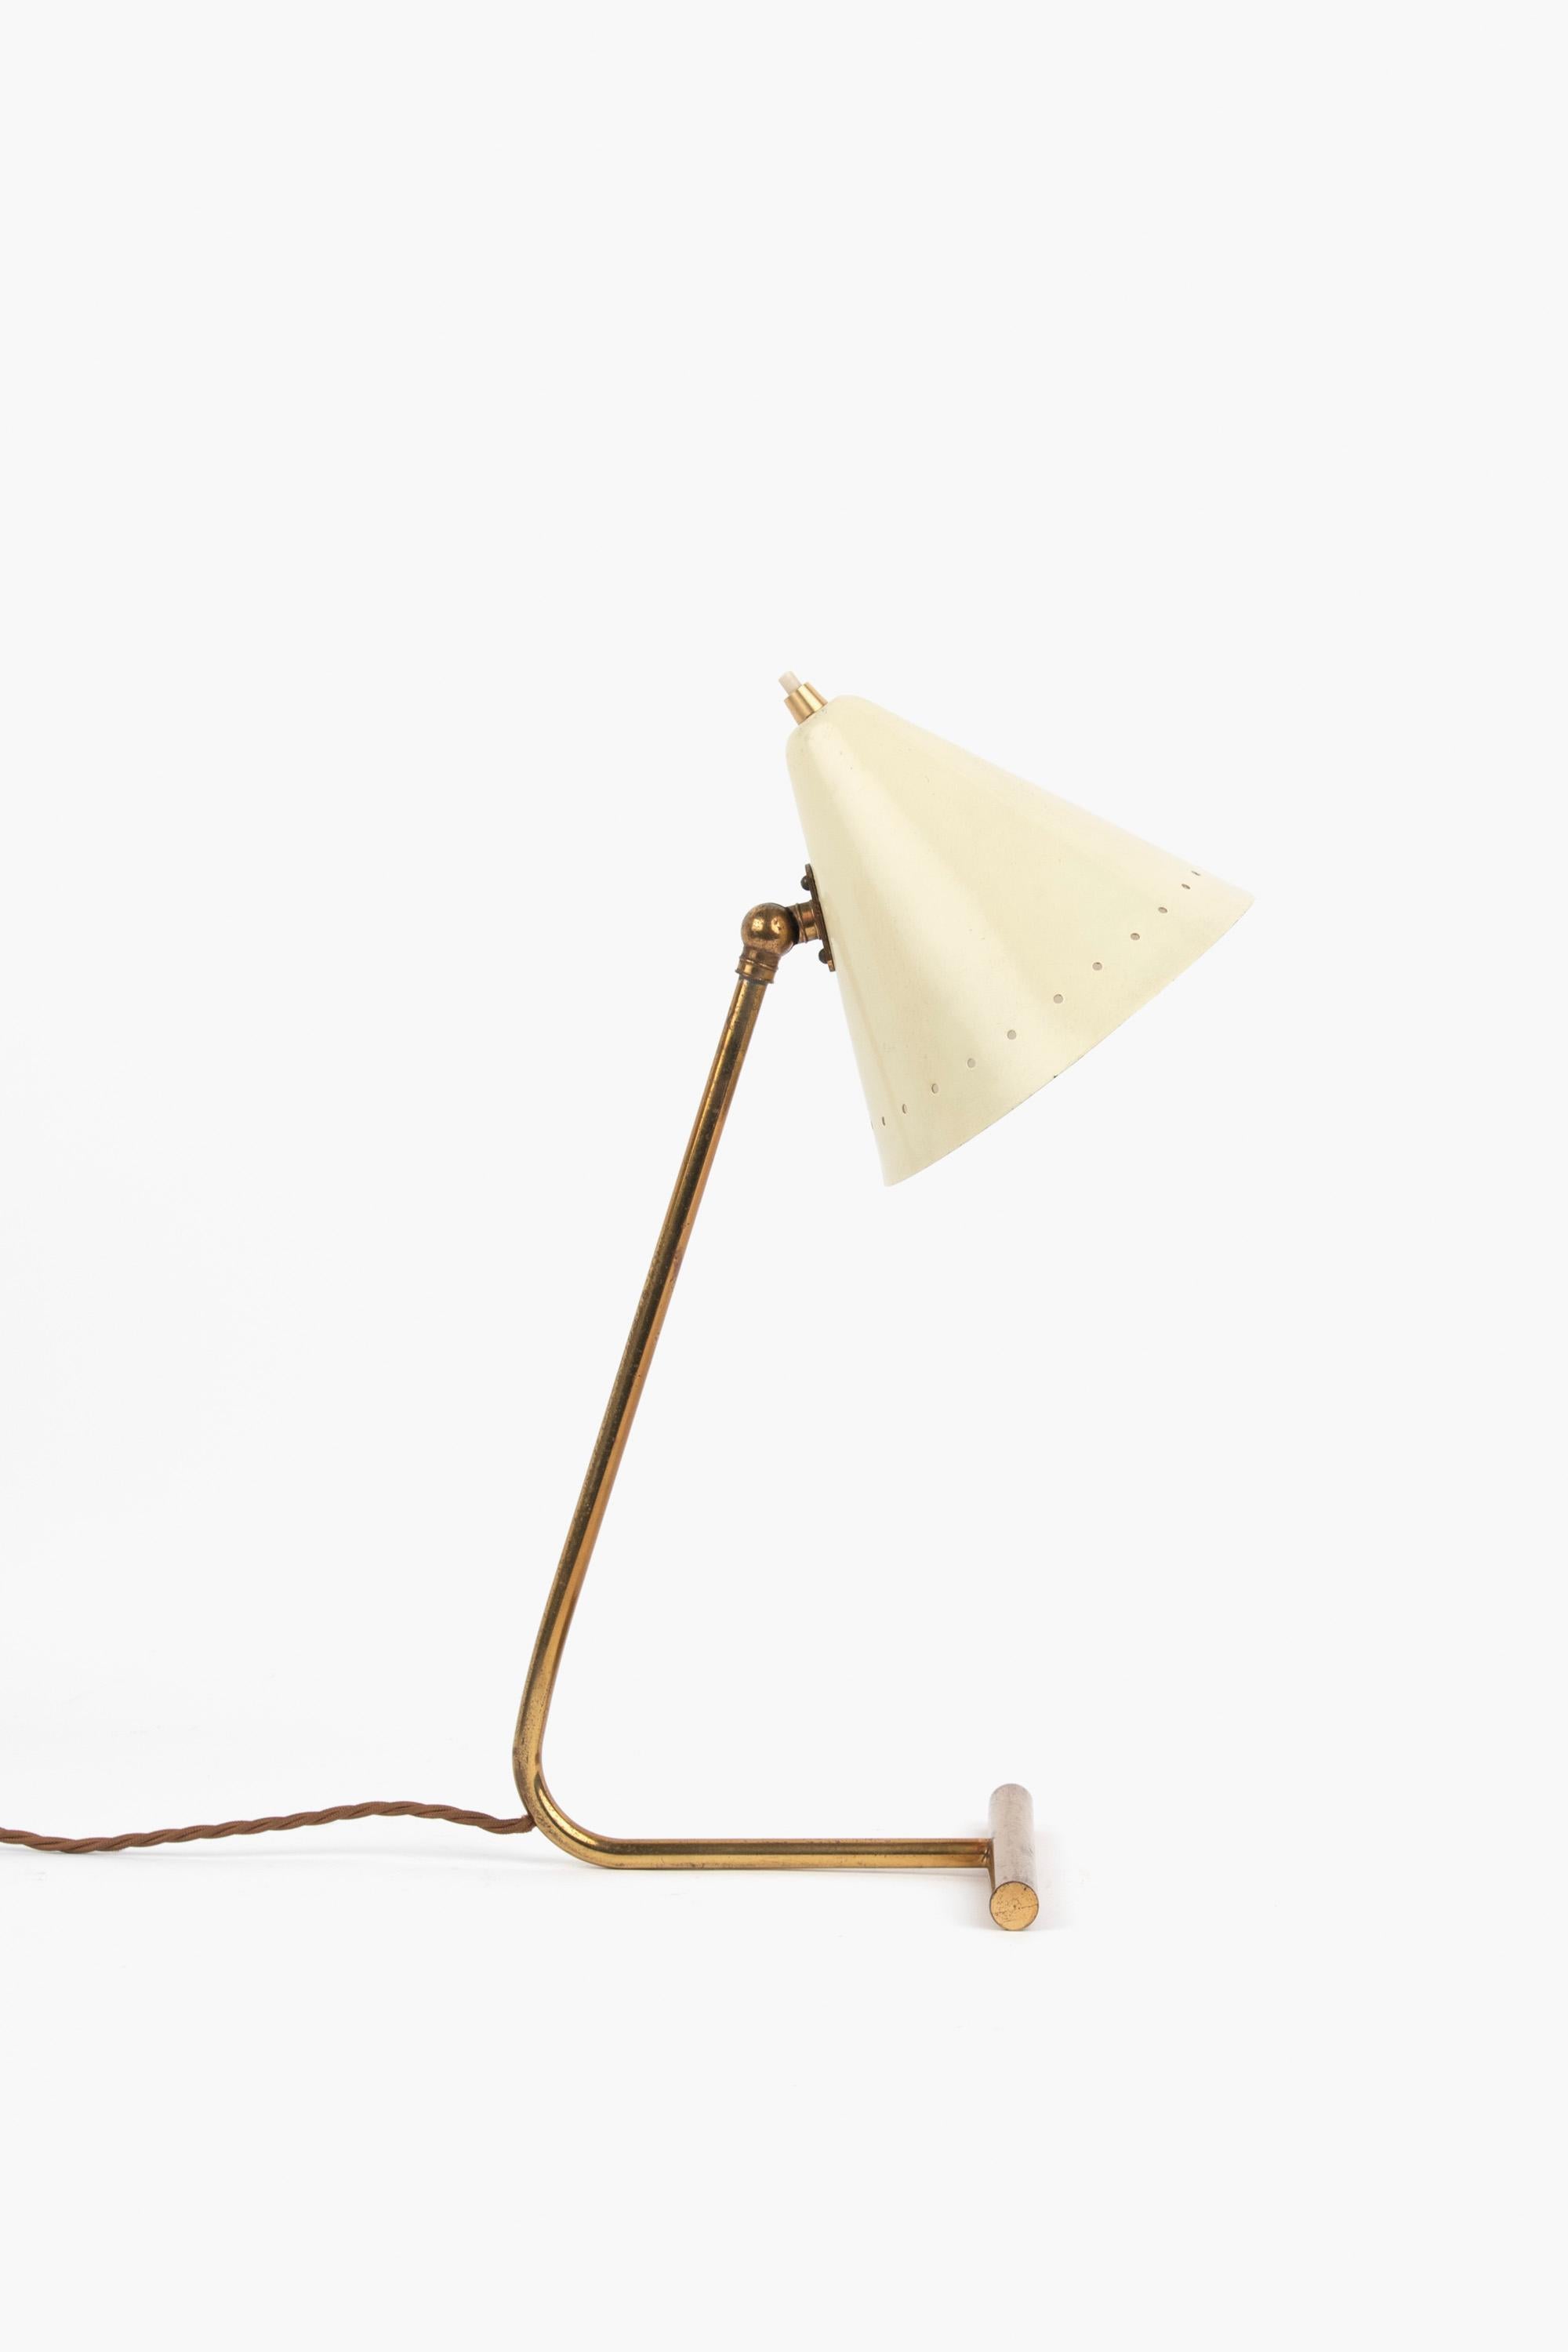 Lacquered 1950s Italian Desk Lamp by Gilardi & Barzaghi For Sale